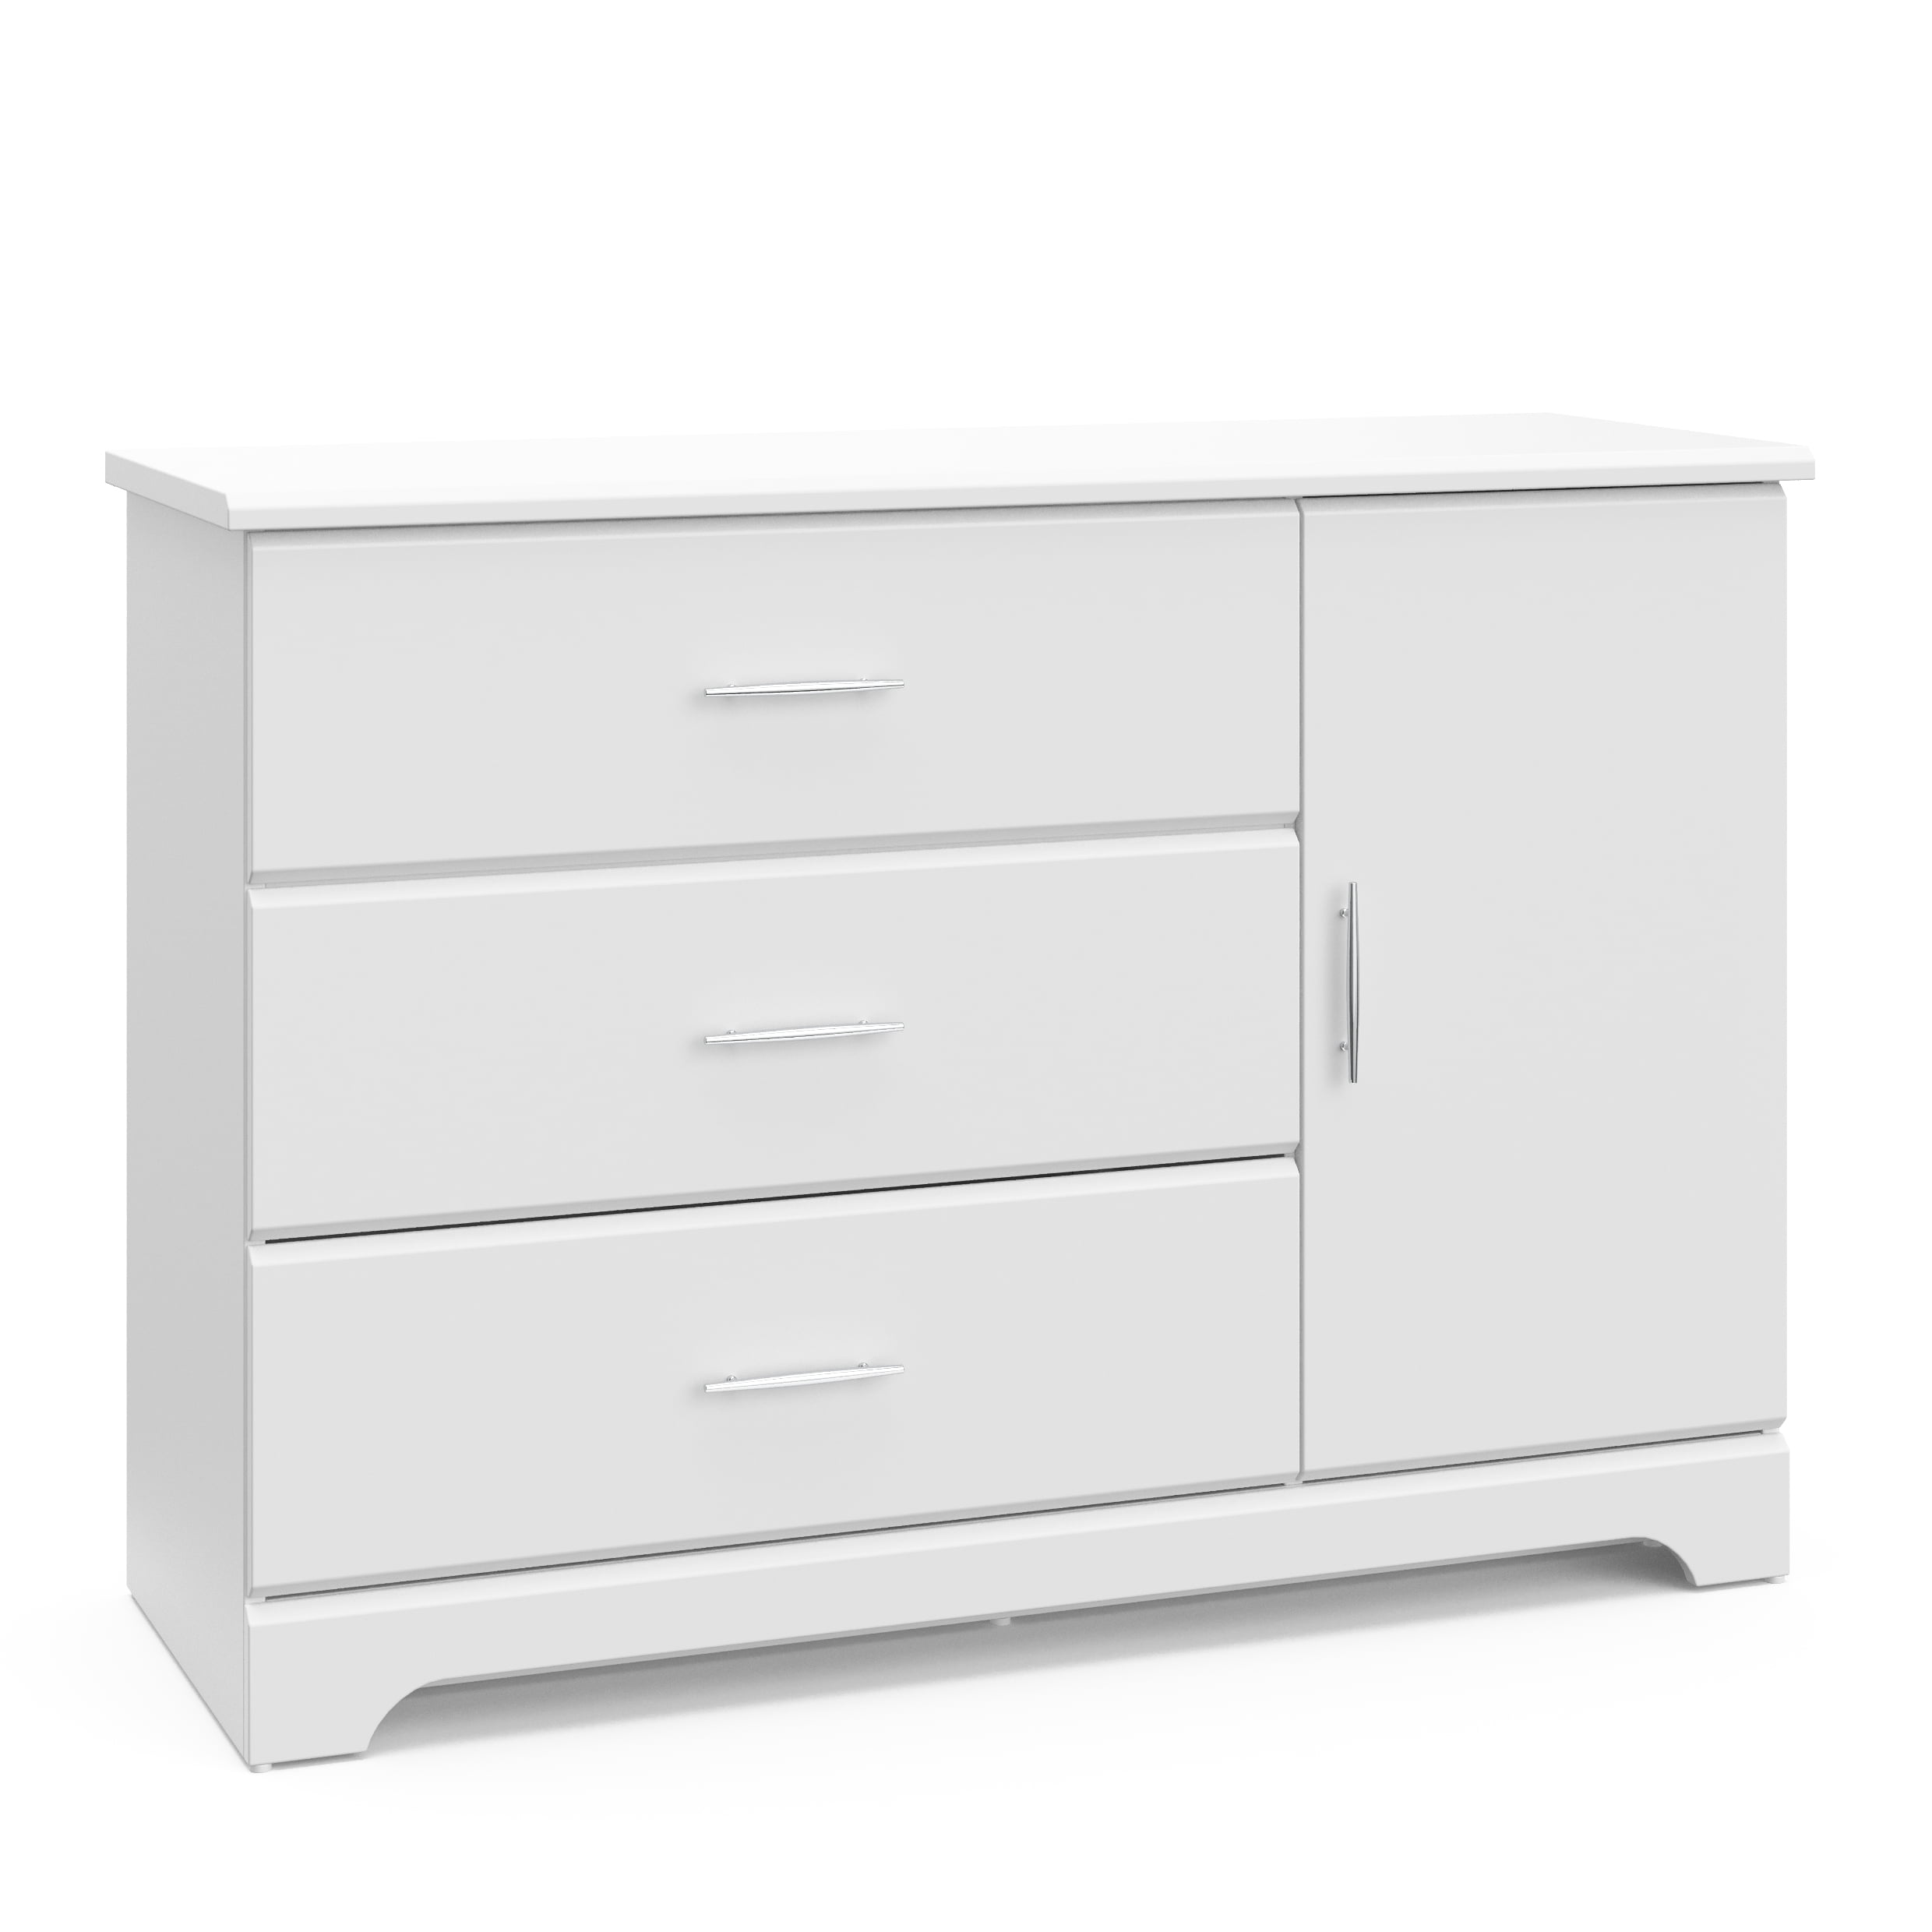 Ideal for Nursery Toddlers Room Kids Room Wood and Composite Construction Storkcraft Brookside 3 Drawer Chest Gray Kids Bedroom Dresser with 3 Drawers 